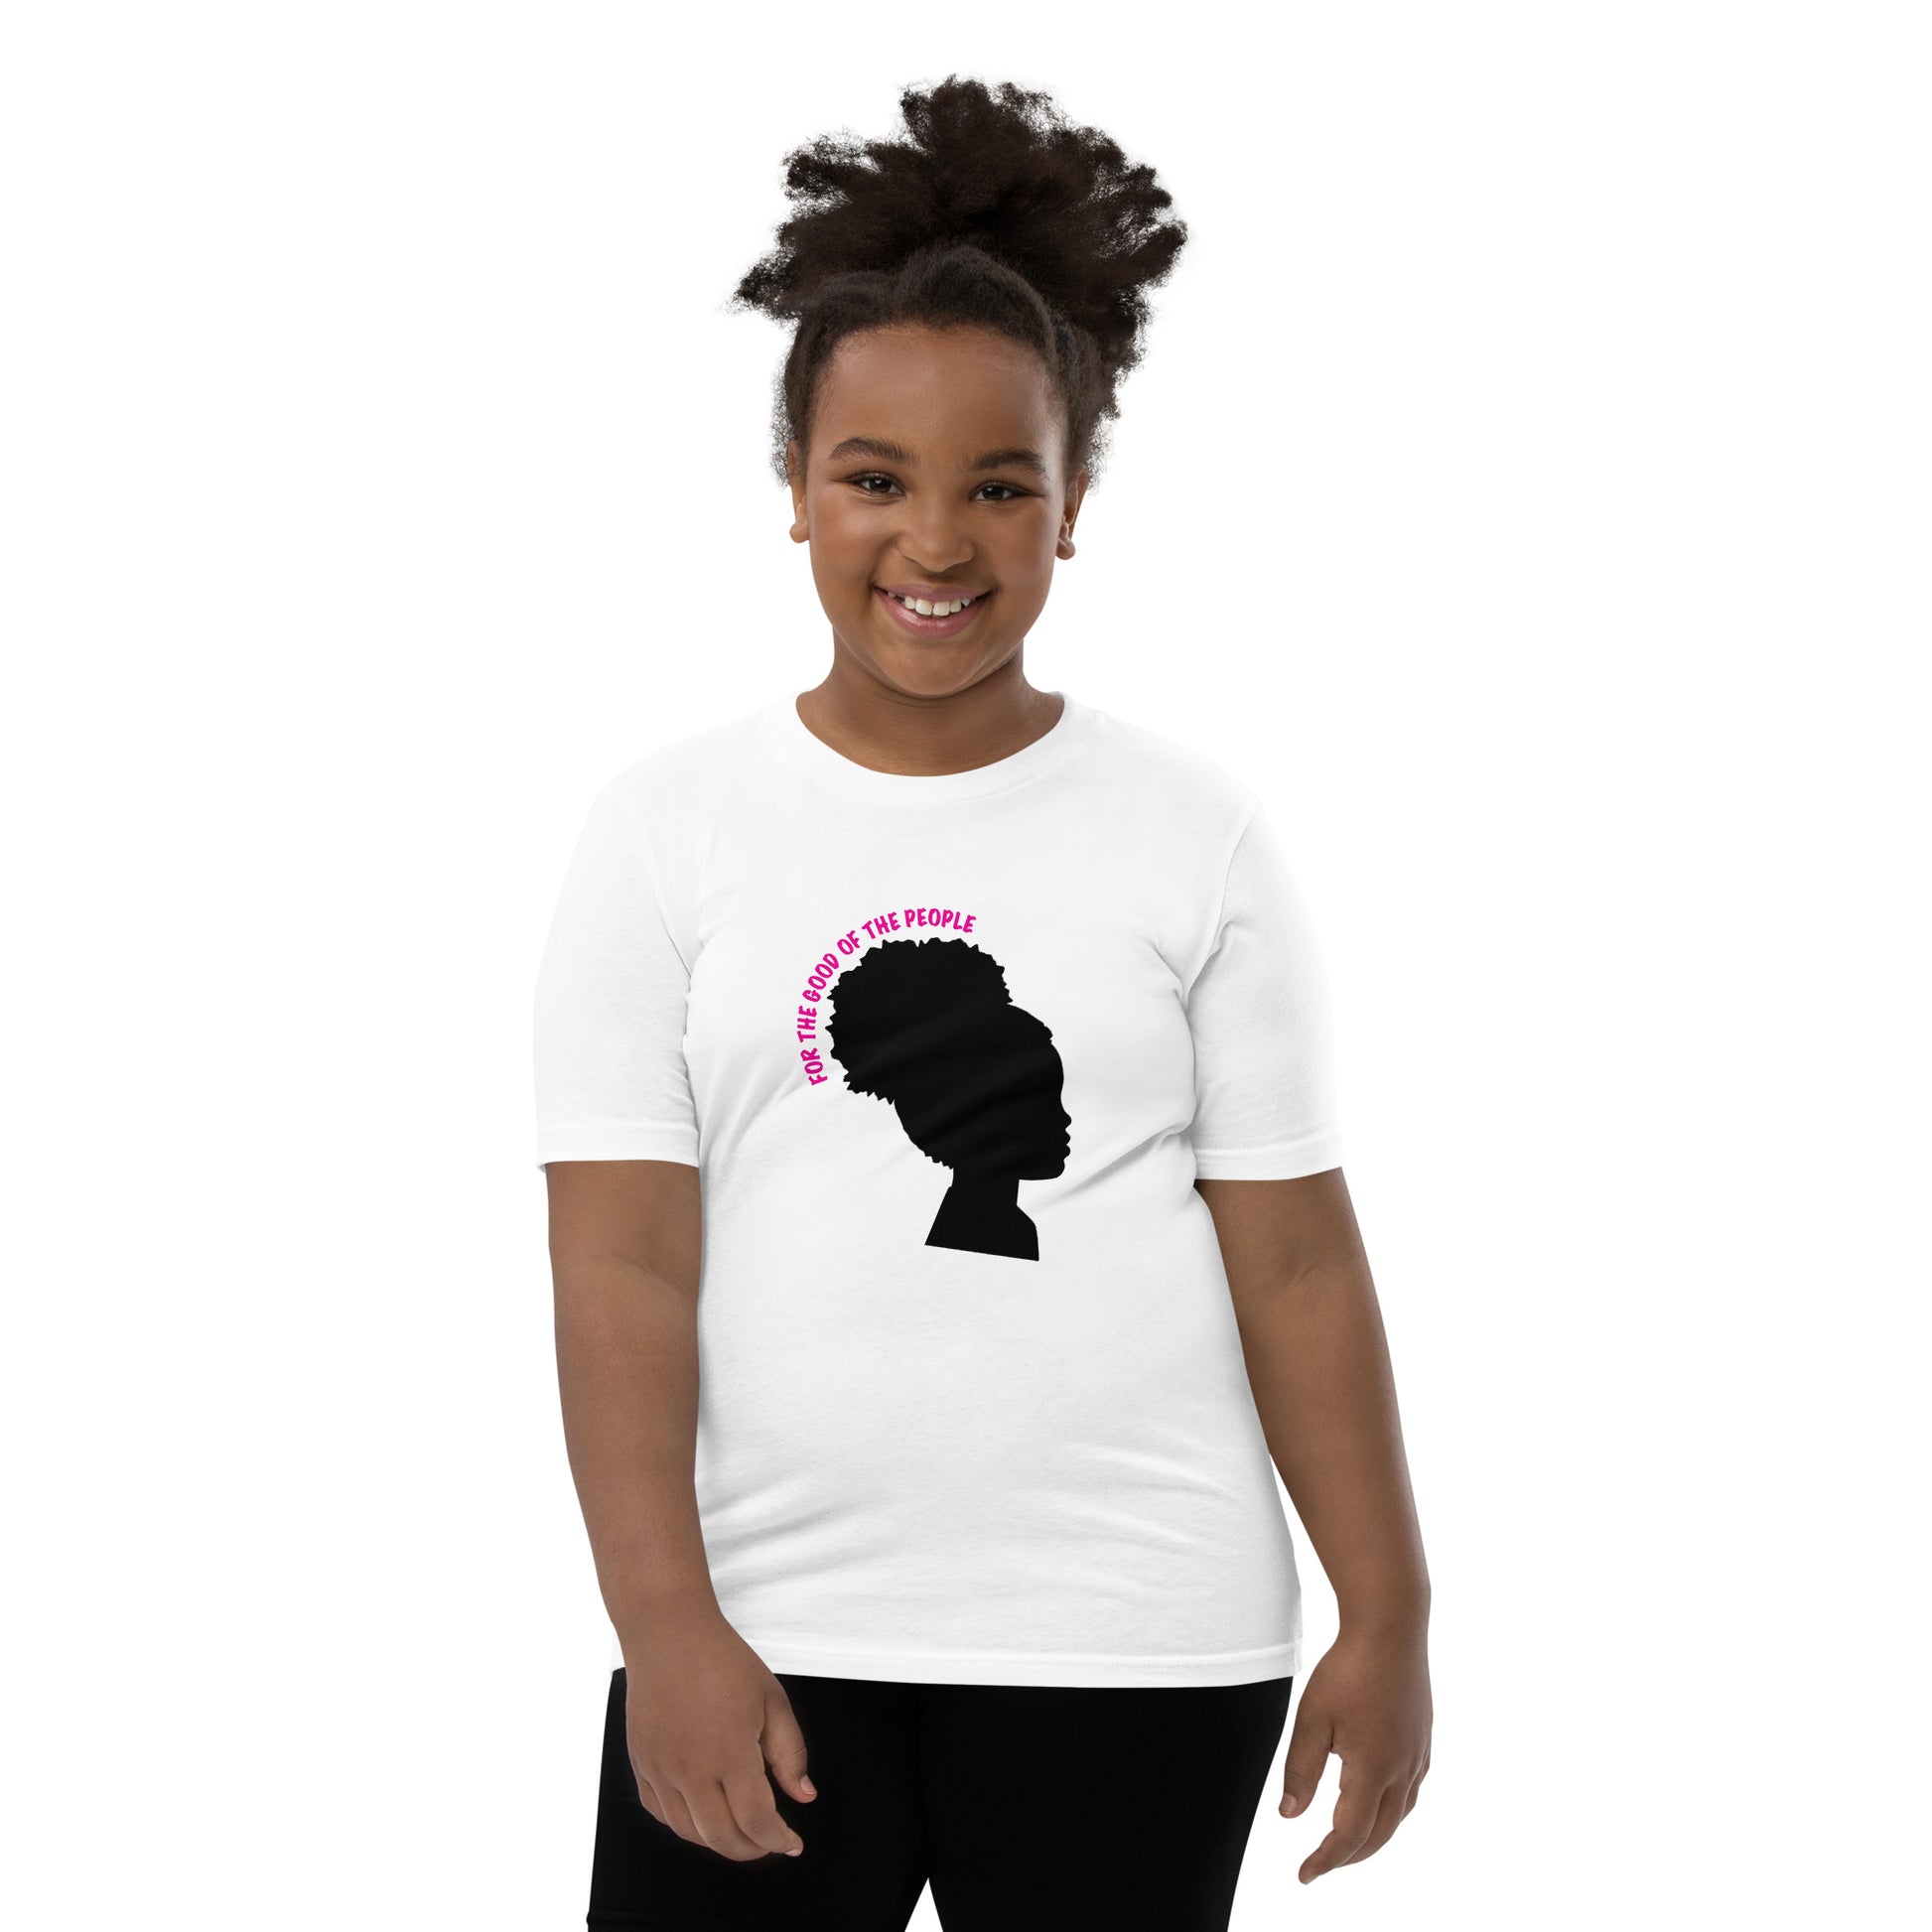 Little girl with afro puff wearing a white tee with silhouette of little girl with afro puff with for the good of the people in pink around the head.